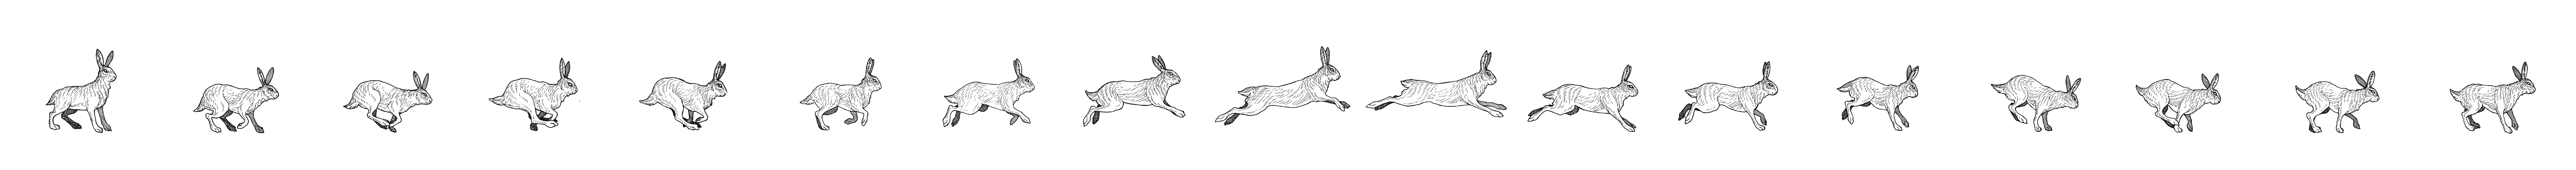 Hare Running Cycle